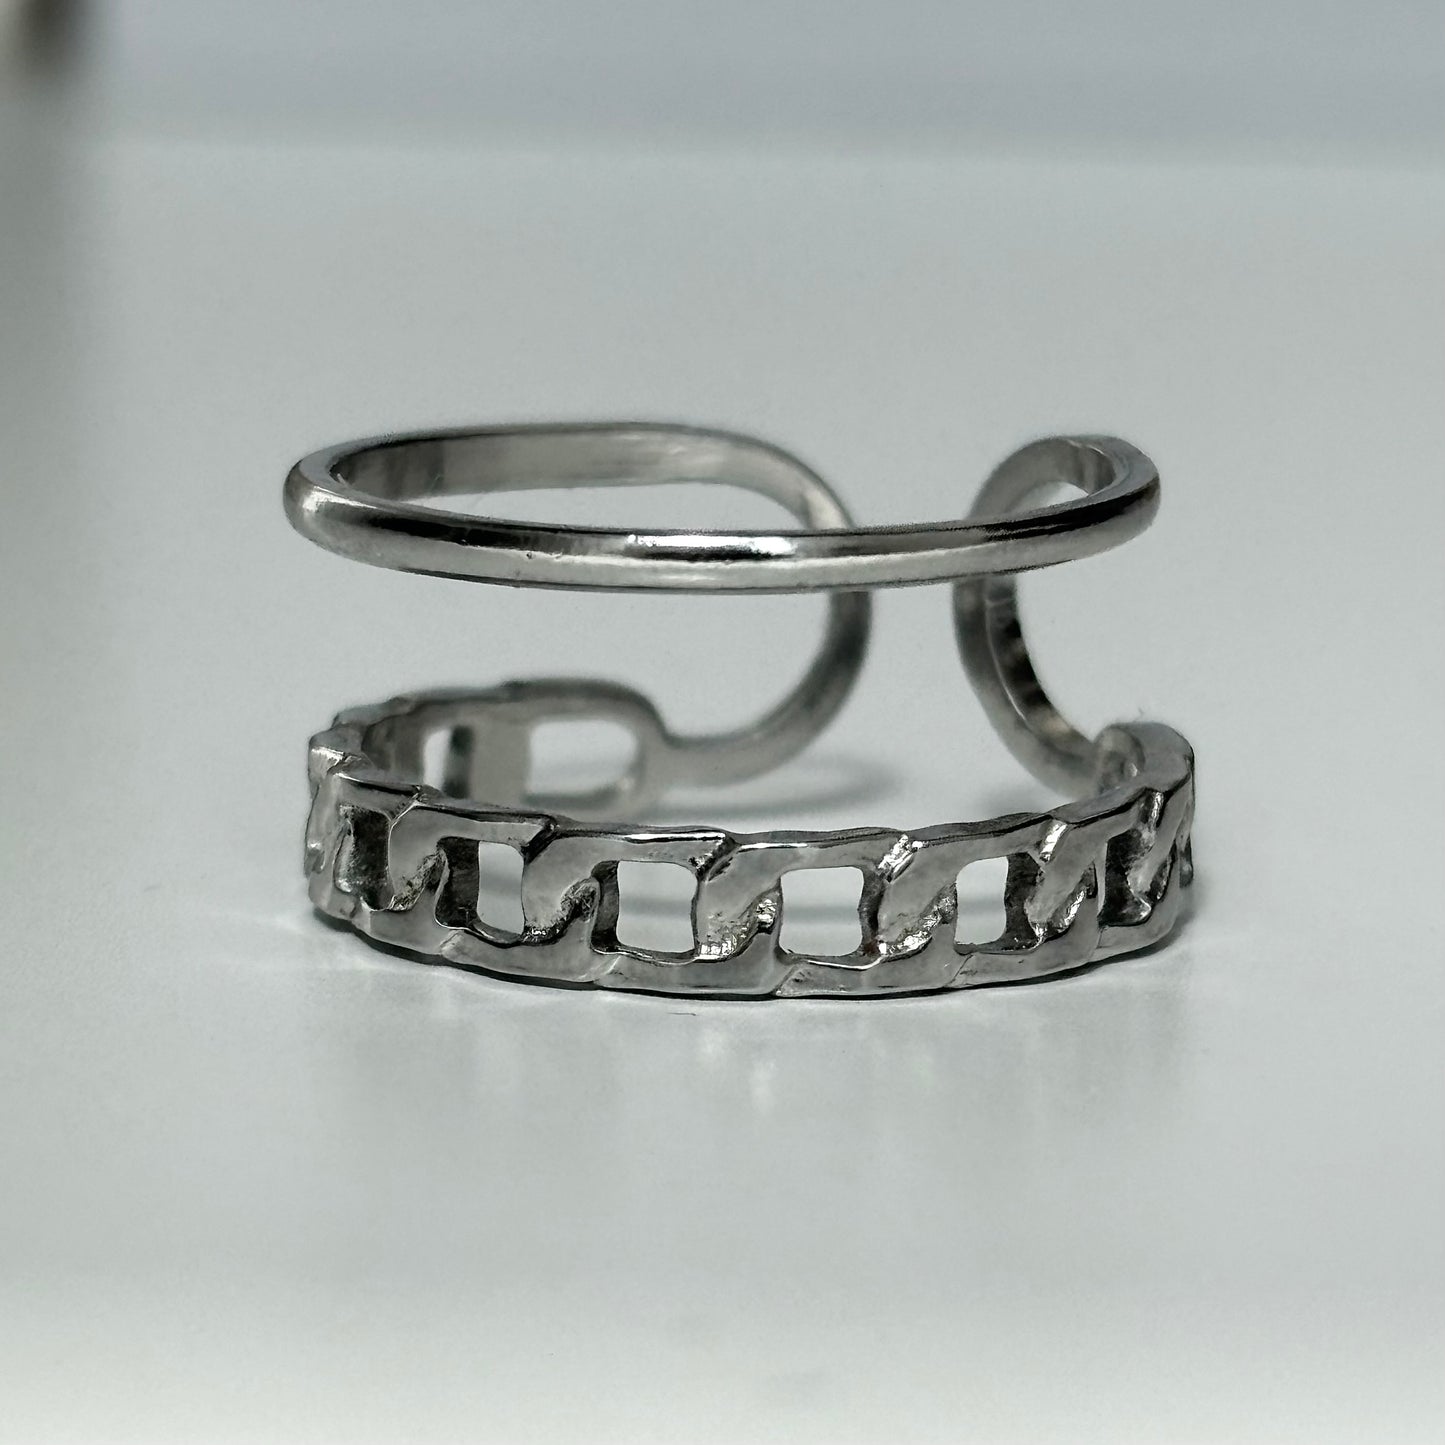 Chain and band double layer adjustable ring in stainless steel water and tarnish resistant